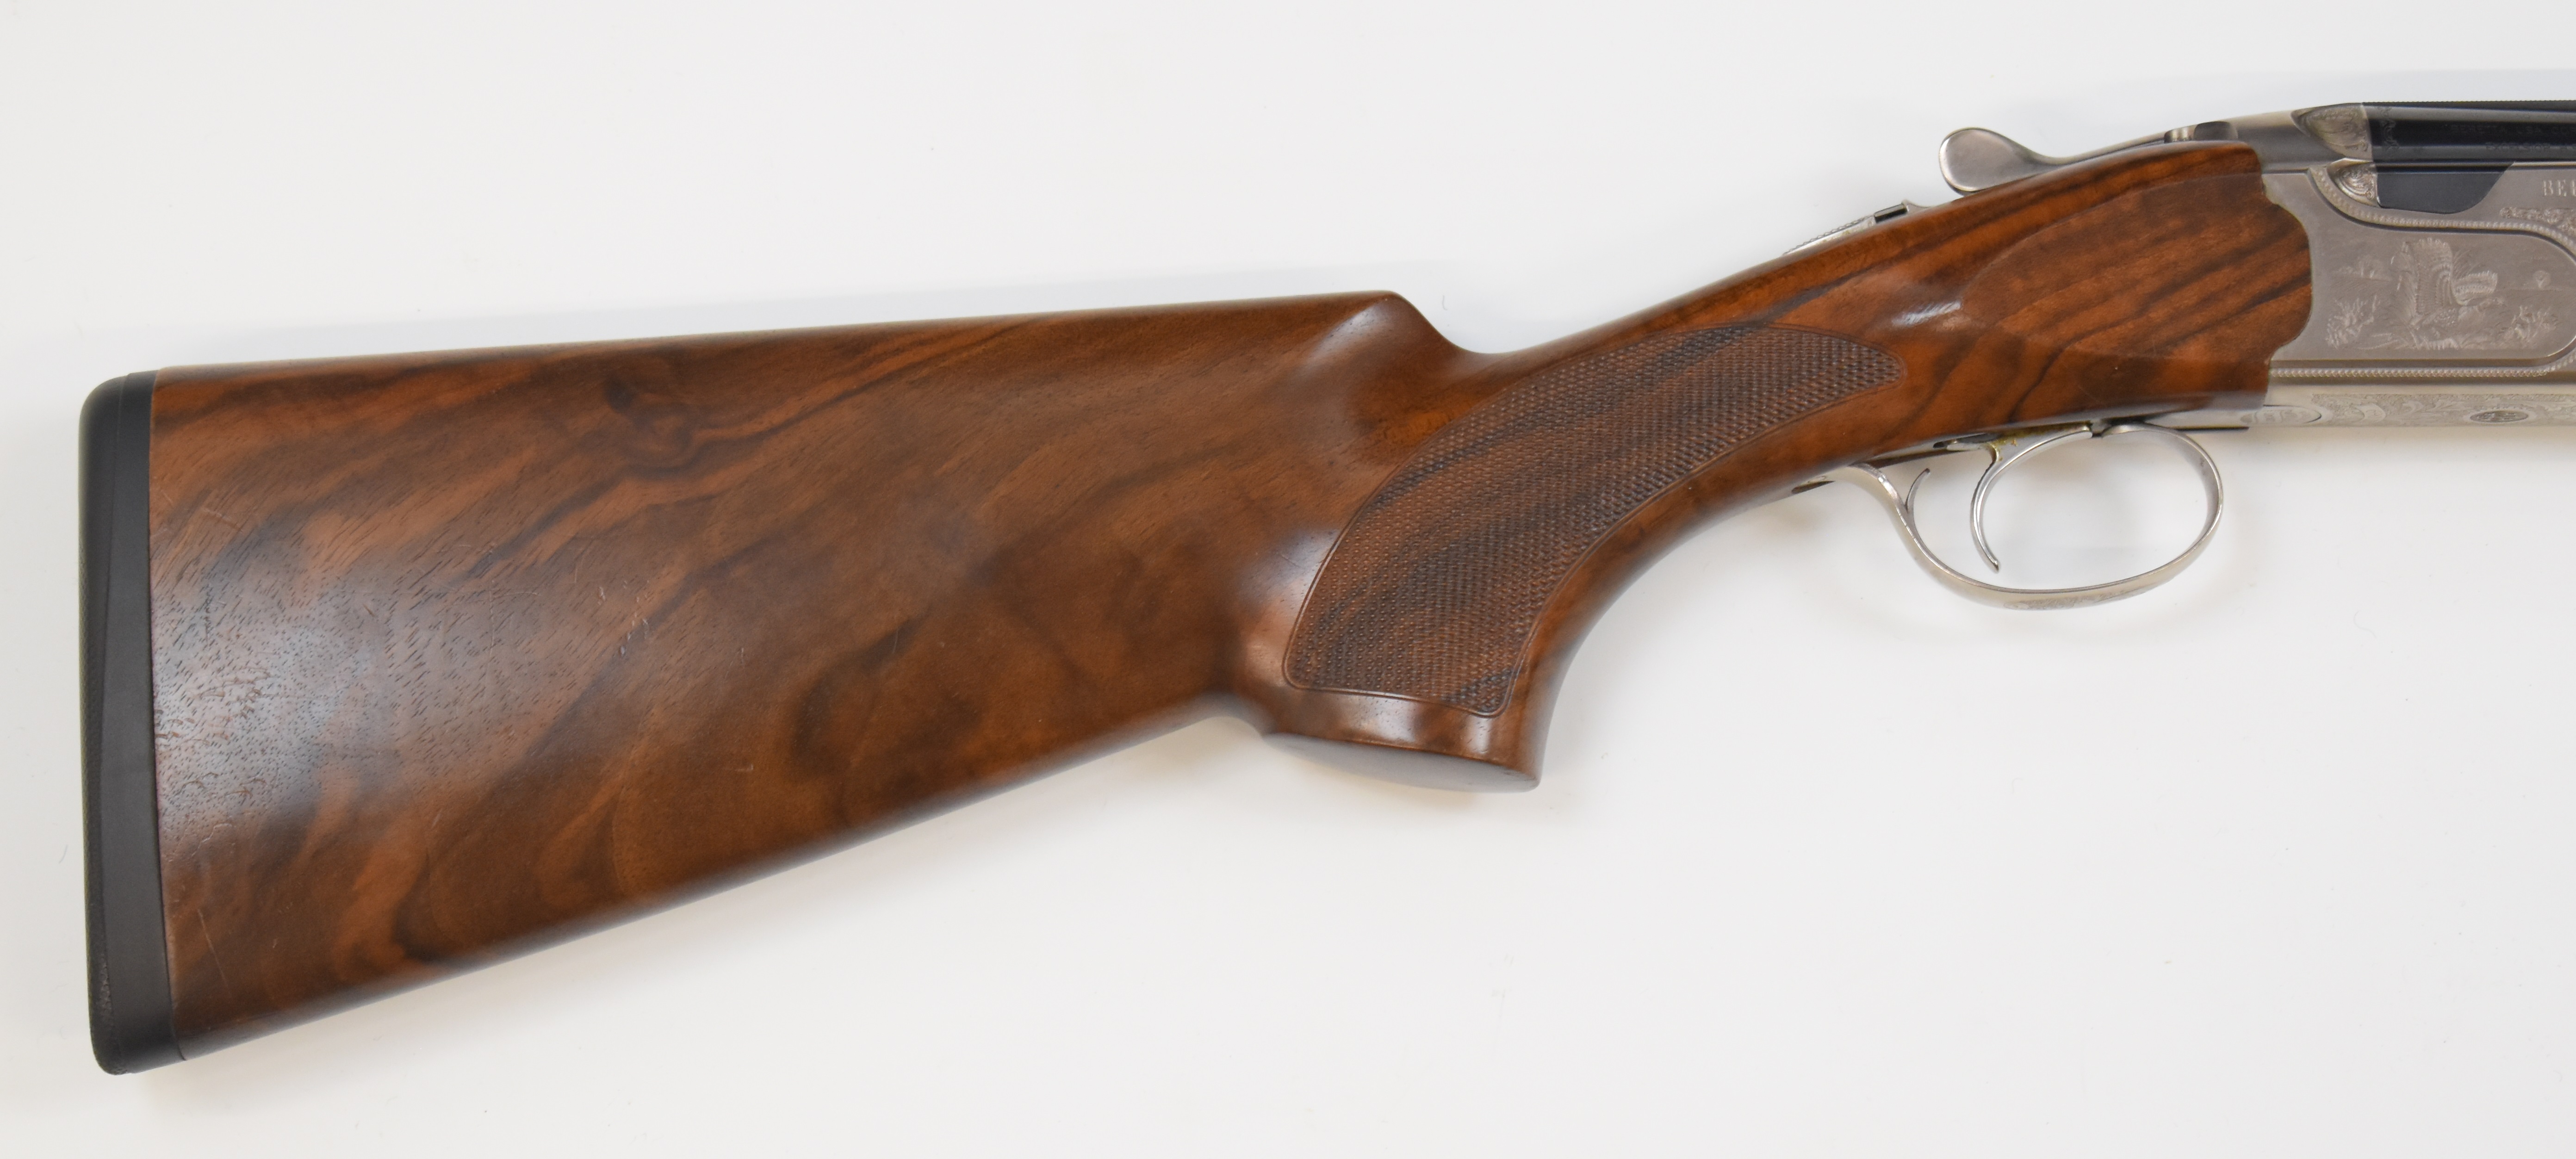 Beretta 690 III Sporting 12 bore over and under ejector shotgun with named and engraved scenes of - Image 3 of 15